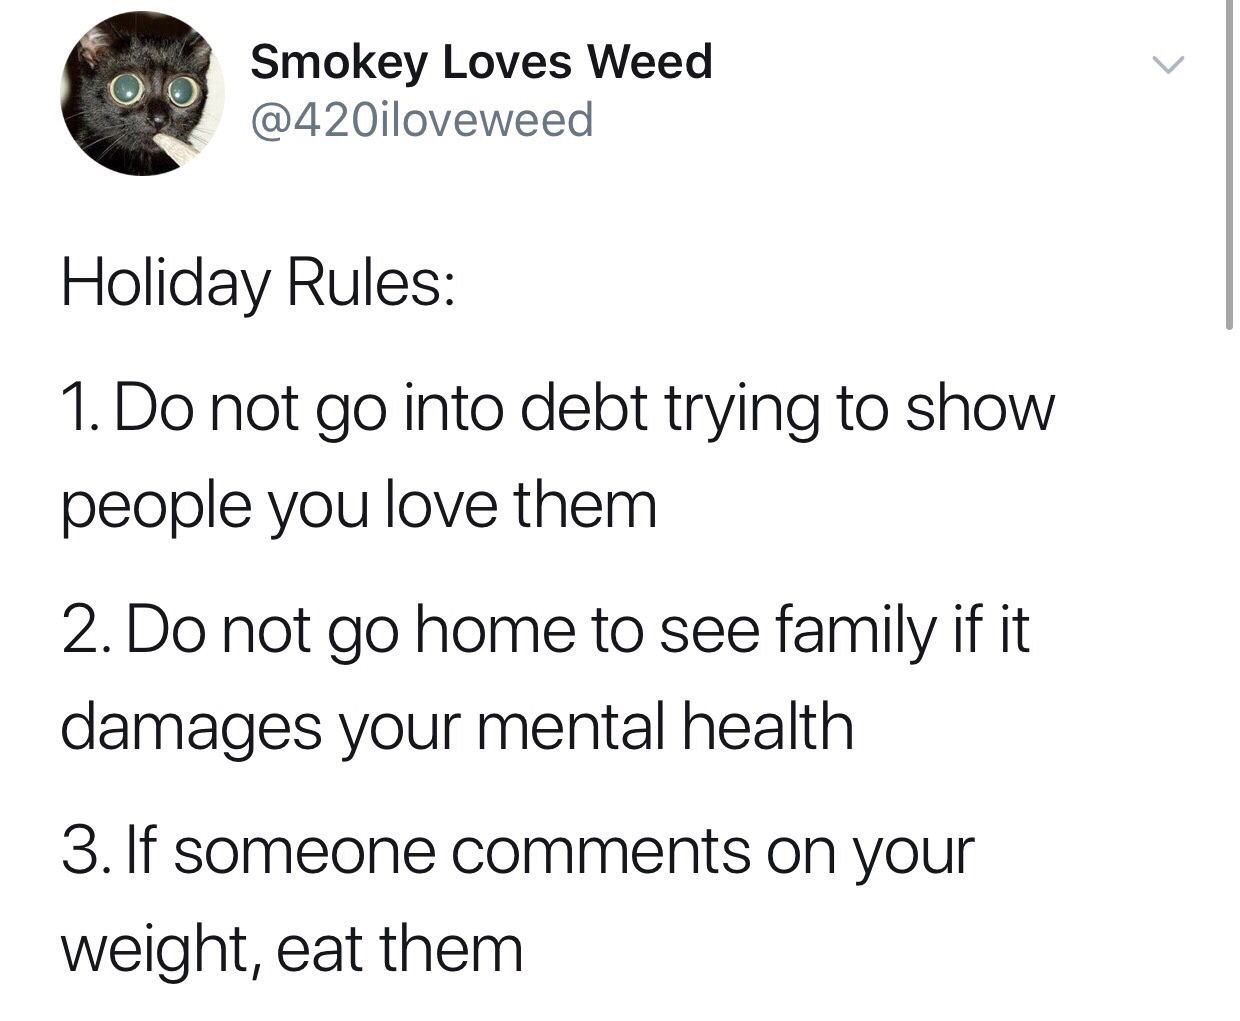 airpods ceo meme - Oo Smokey Loves Weed Holiday Rules 1. Do not go into debt trying to show people you love them 2. Do not go home to see family if it damages your mental health 3. If someone on your weight, eat them